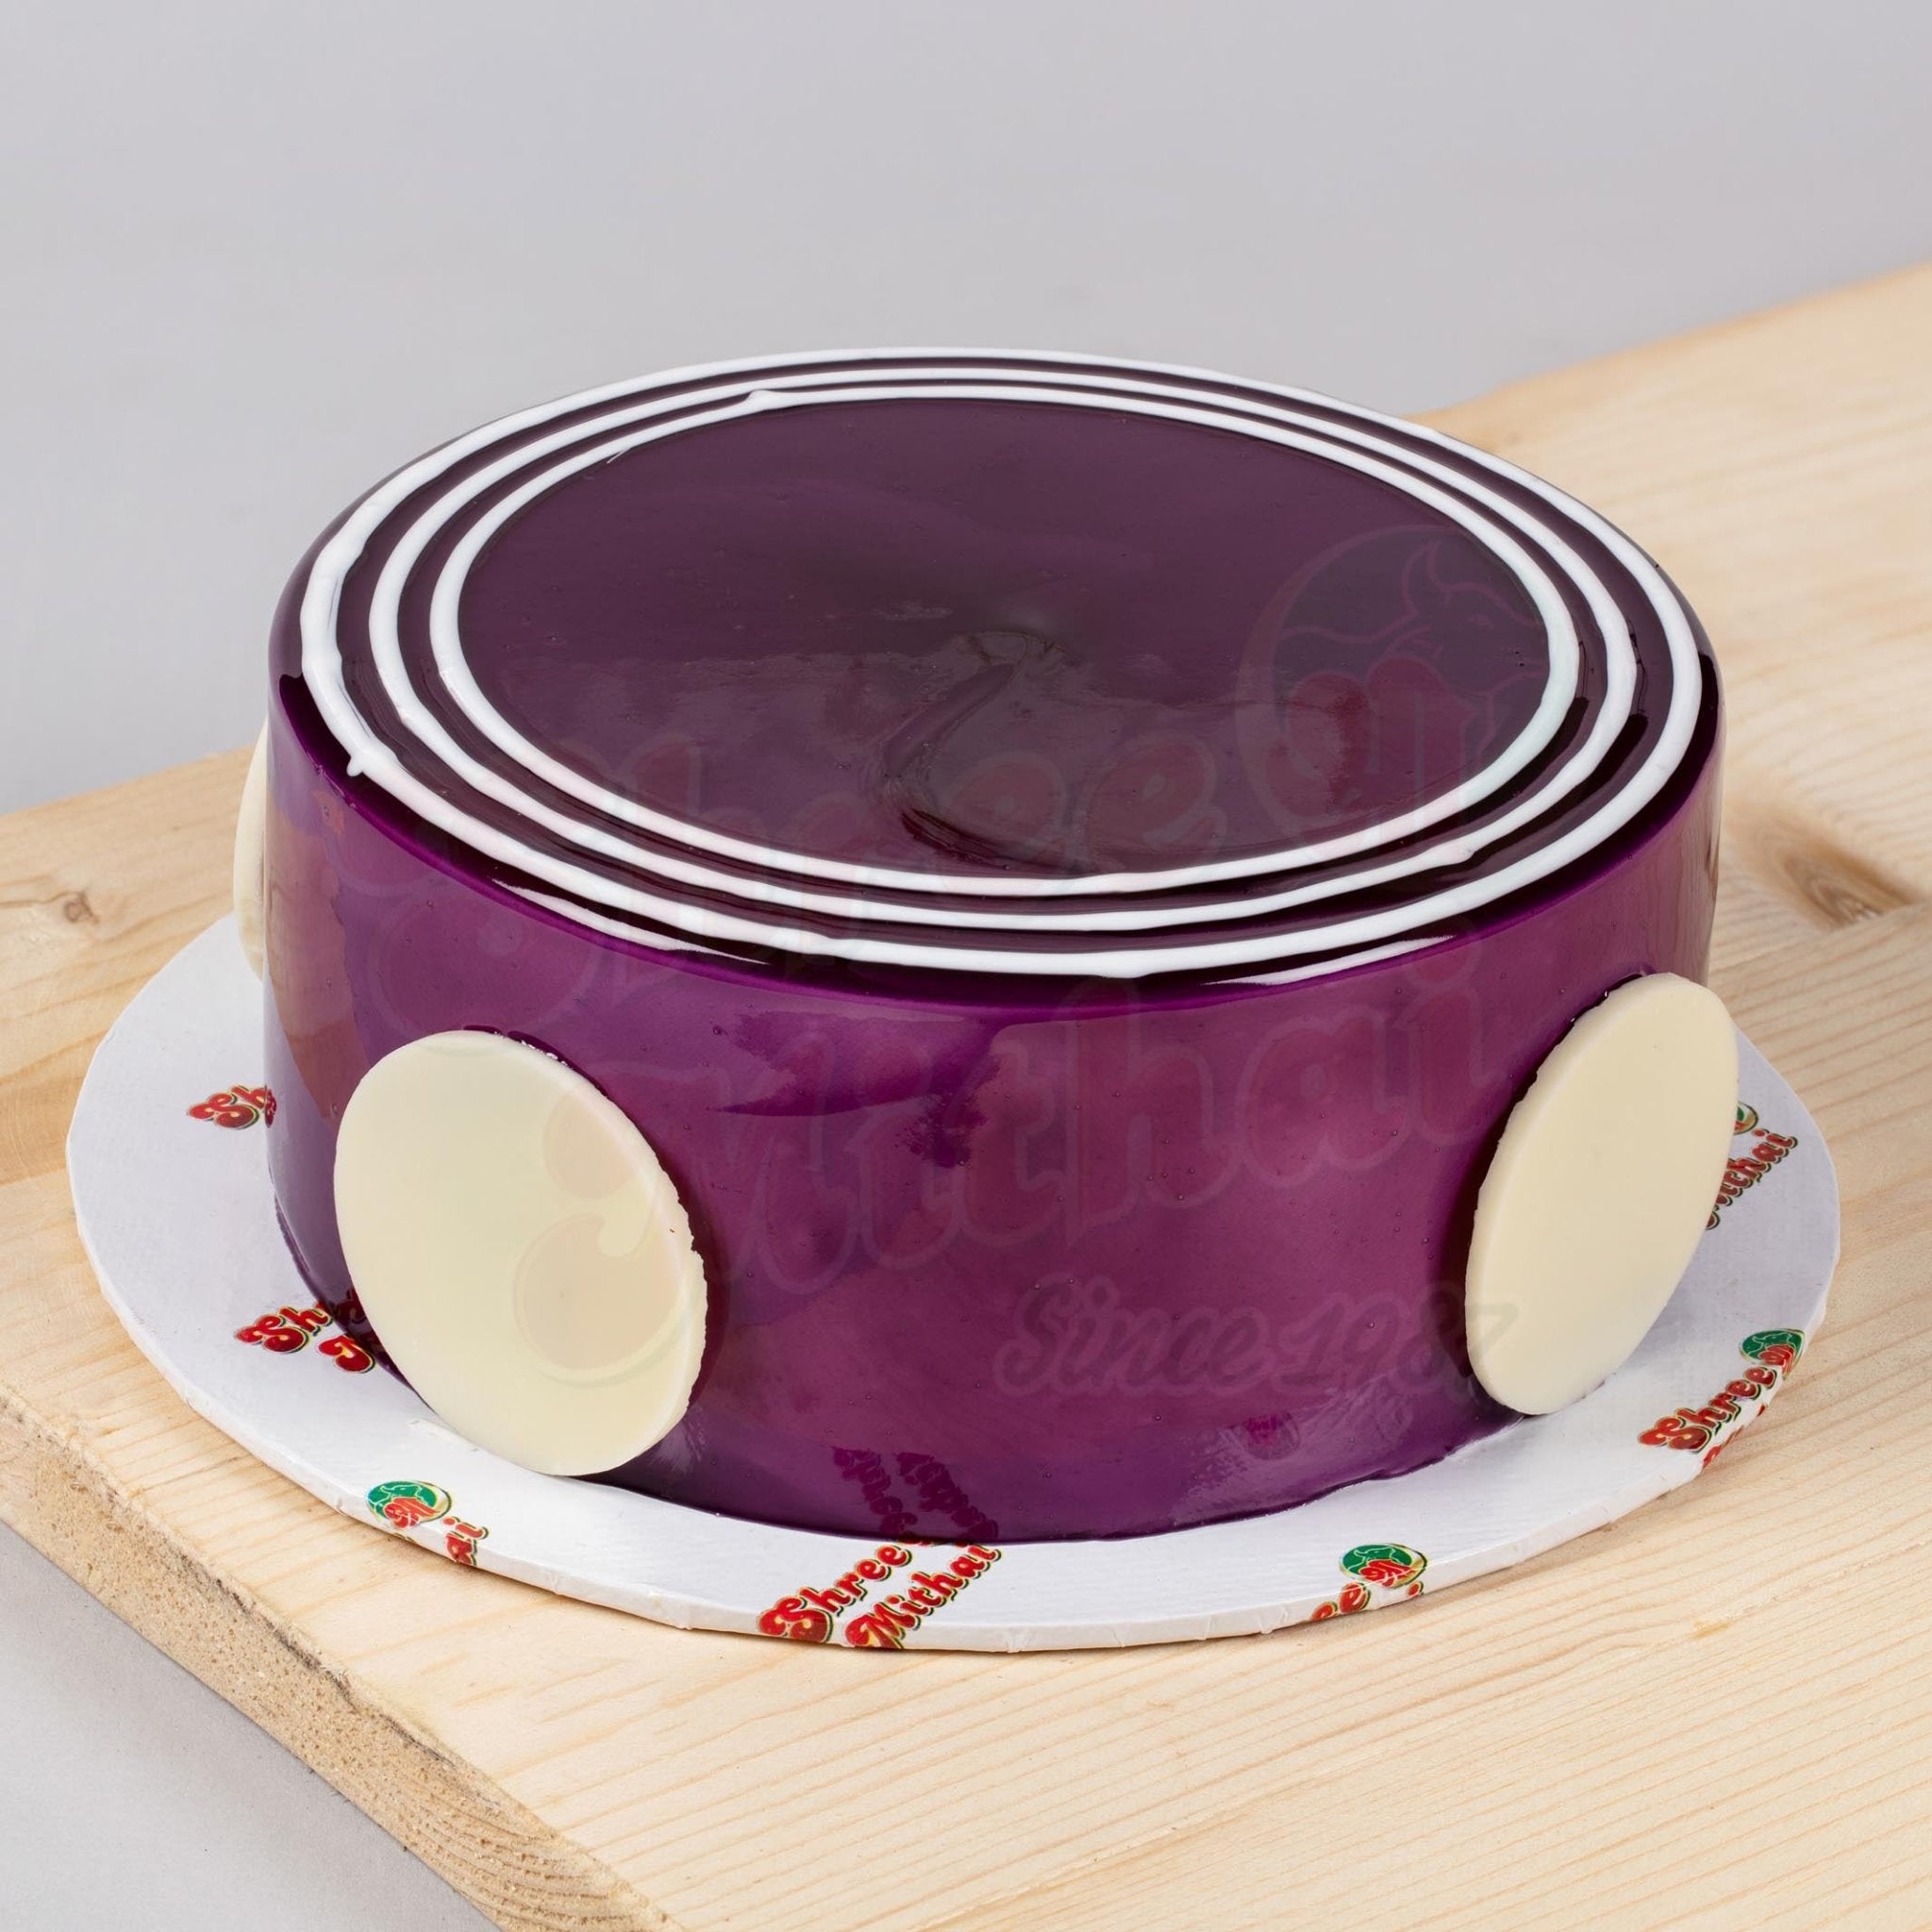 Easy Blueberry Compote Cake & Cupcake Filling - Amycakes Bakes